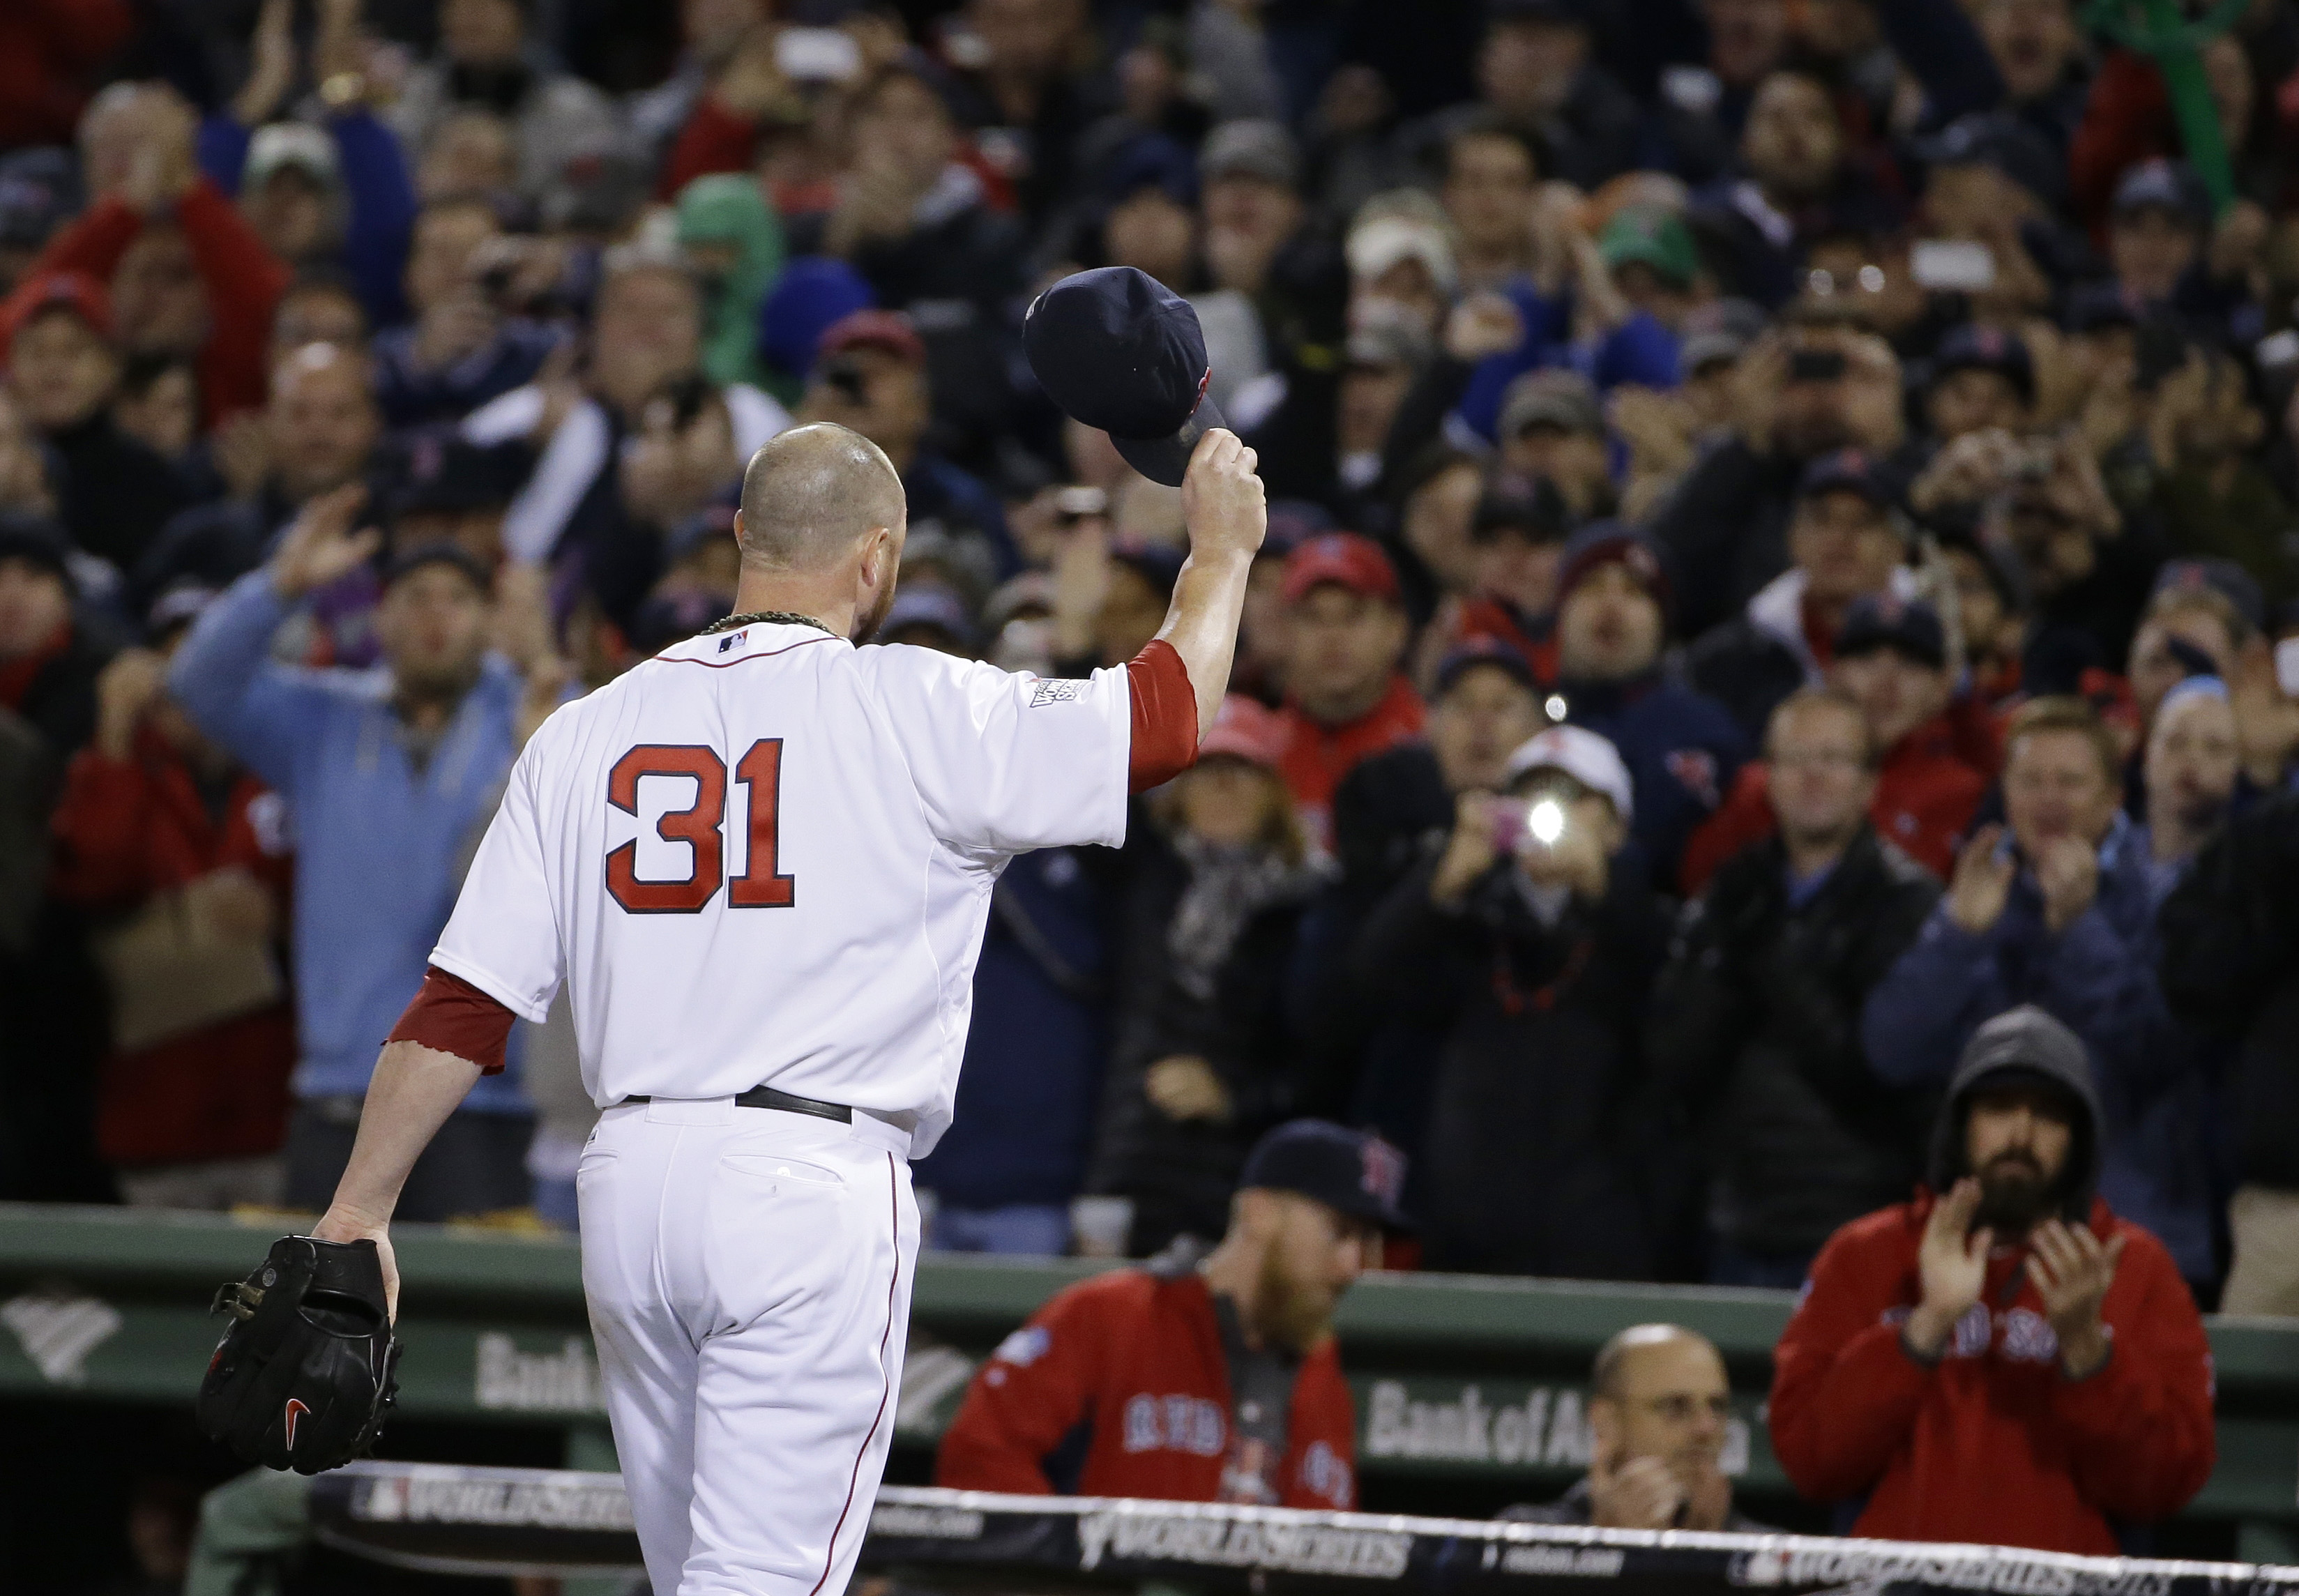 RED SOX NOTEBOOK: Boston Red Sox pitcher Jon Lester roughed up in start